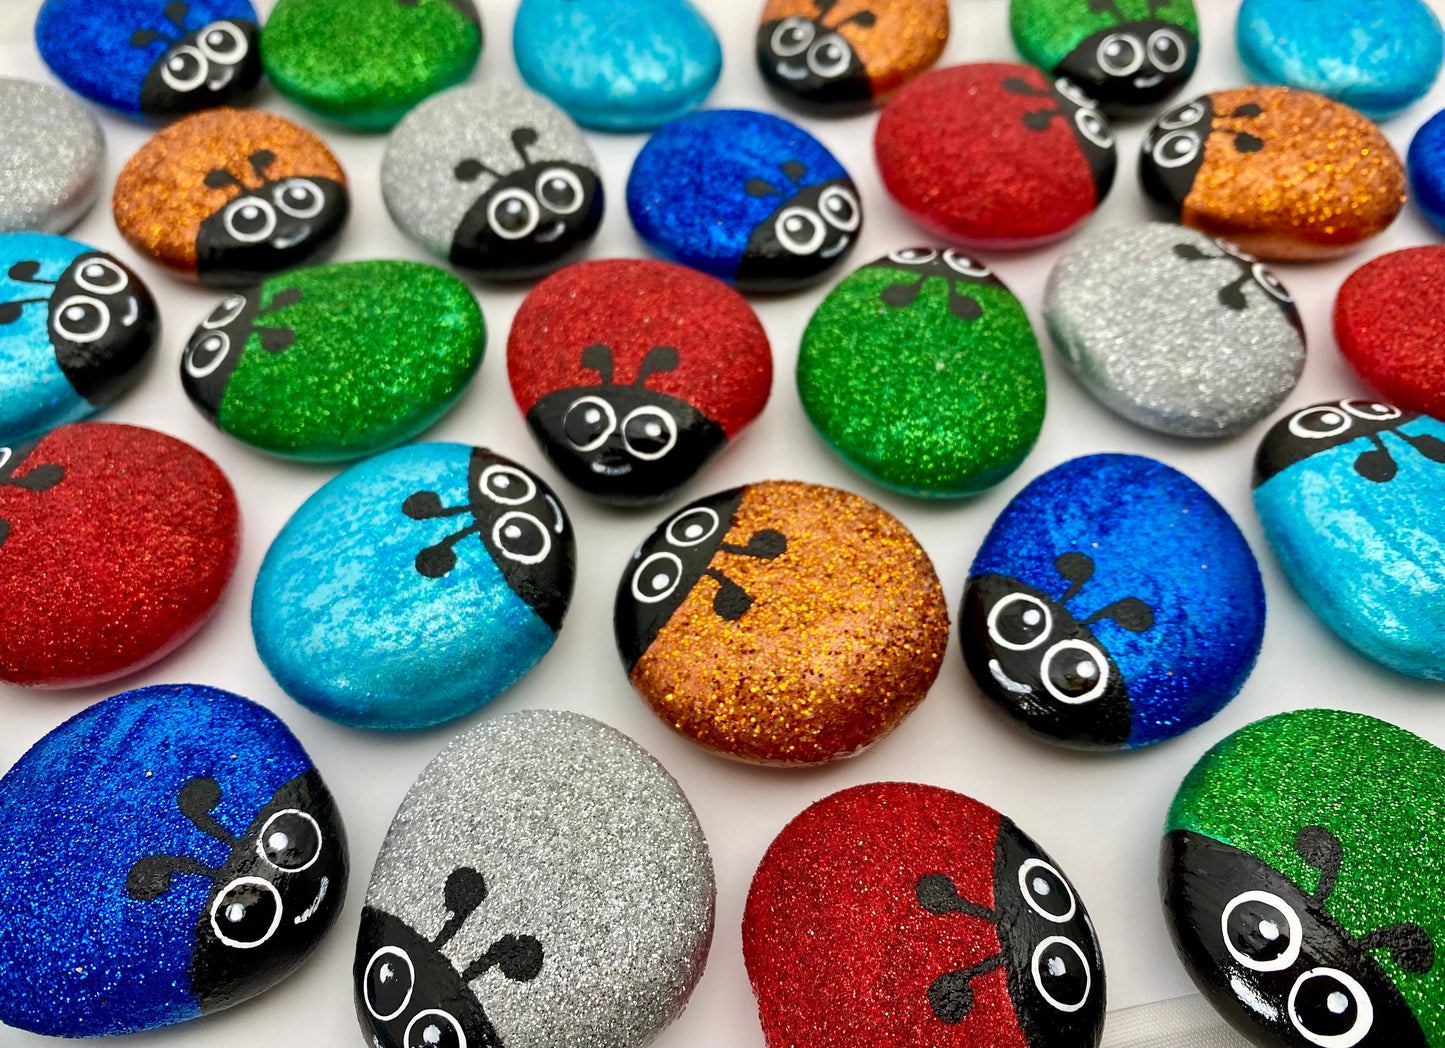 Lots of Hand painted Glitter Bug Pebbles in Red, Green, Blue, Dark Blue, Silver and Gold